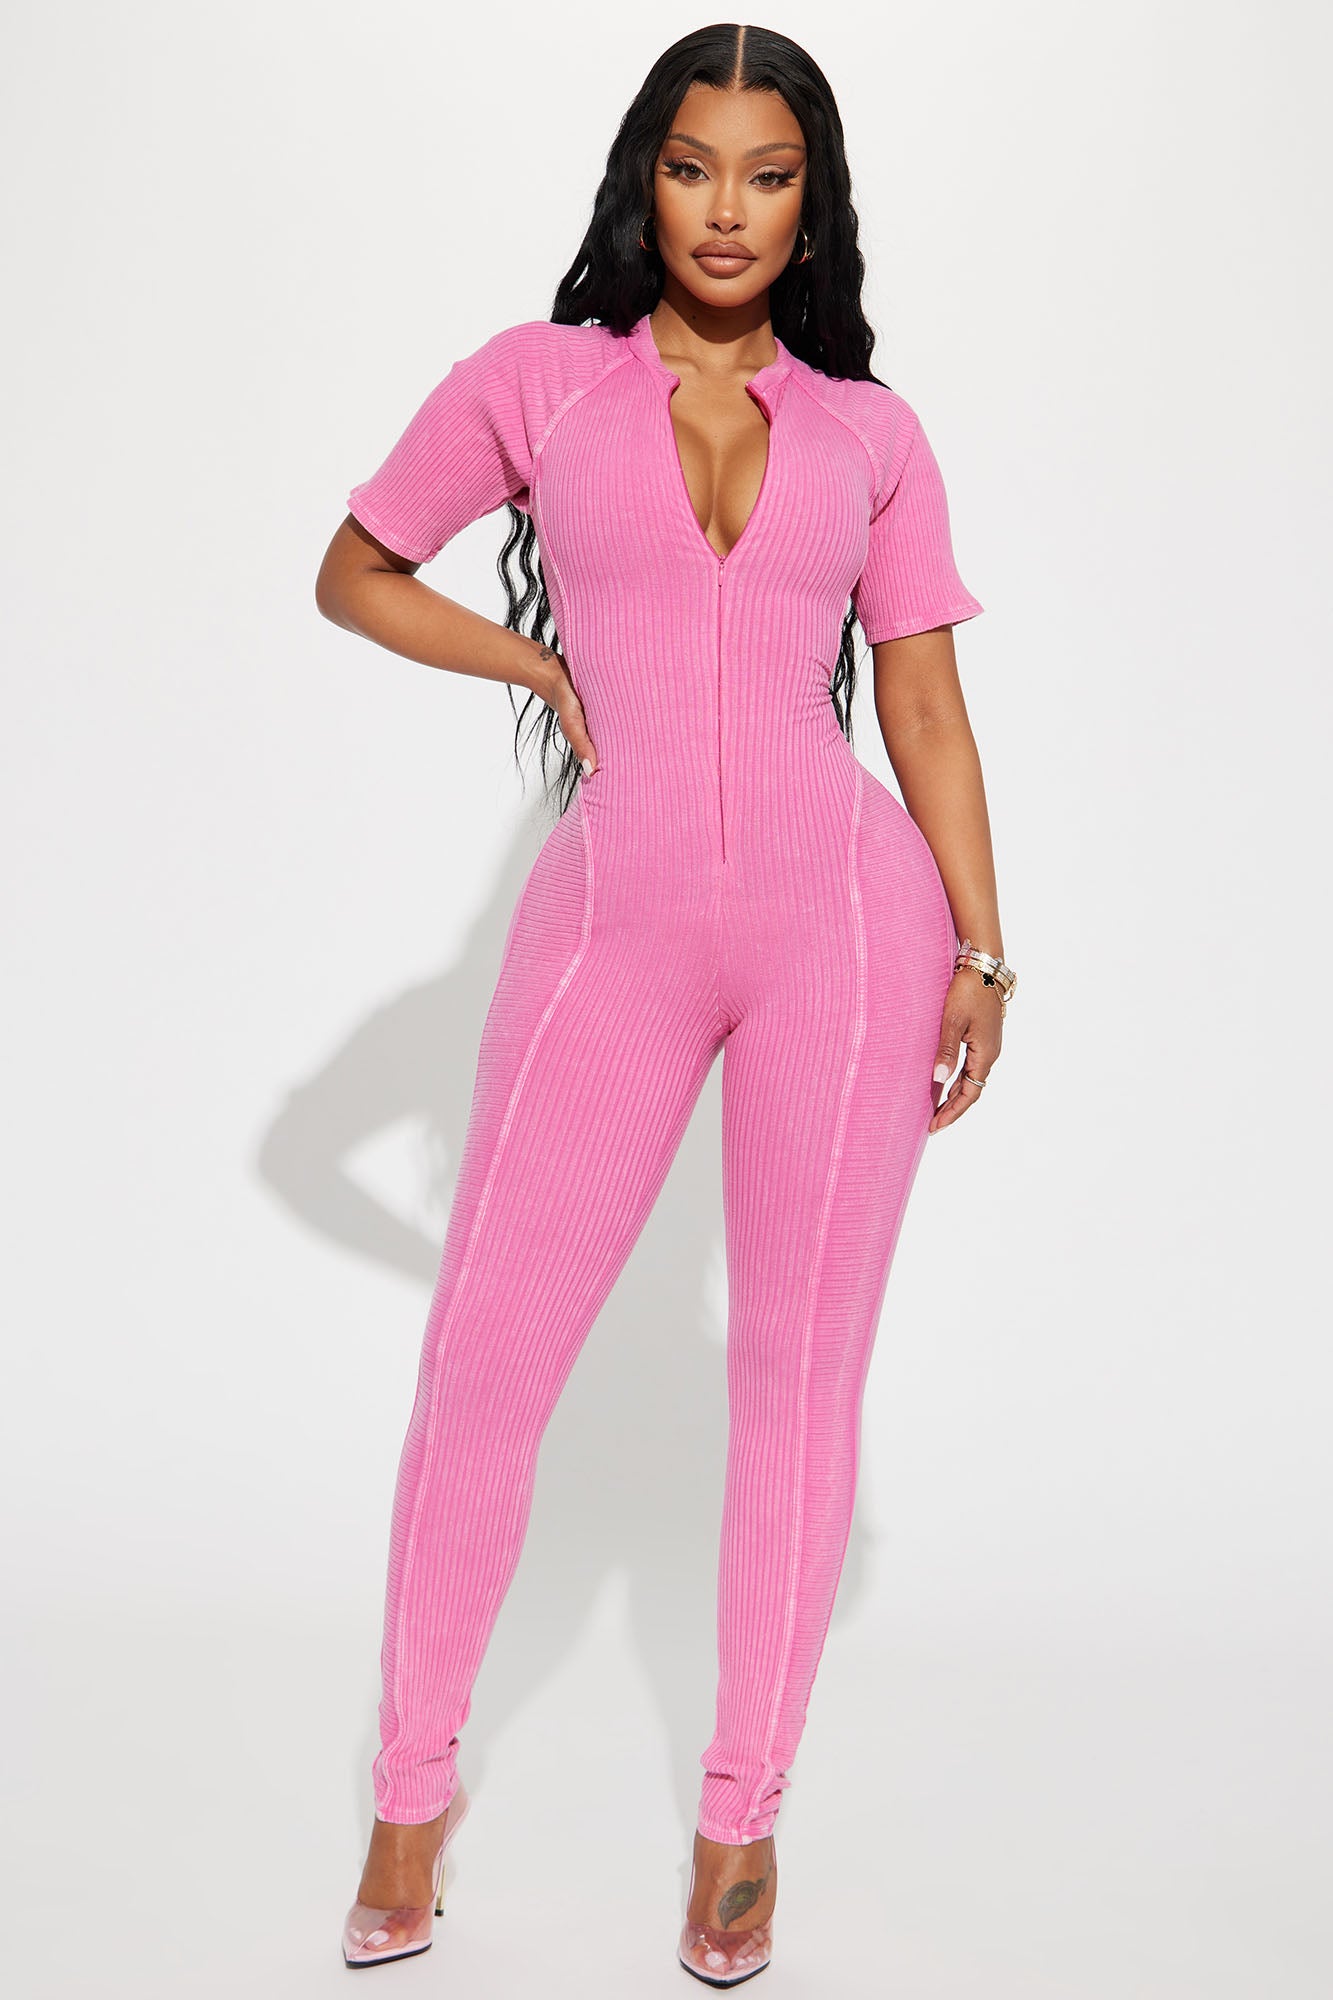 Pink Long Sleeve Jumpsuit with High Neck and Zipper Front | Long sleeve  jumpsuit, Jumpsuits and romper, Long sleeve turtleneck